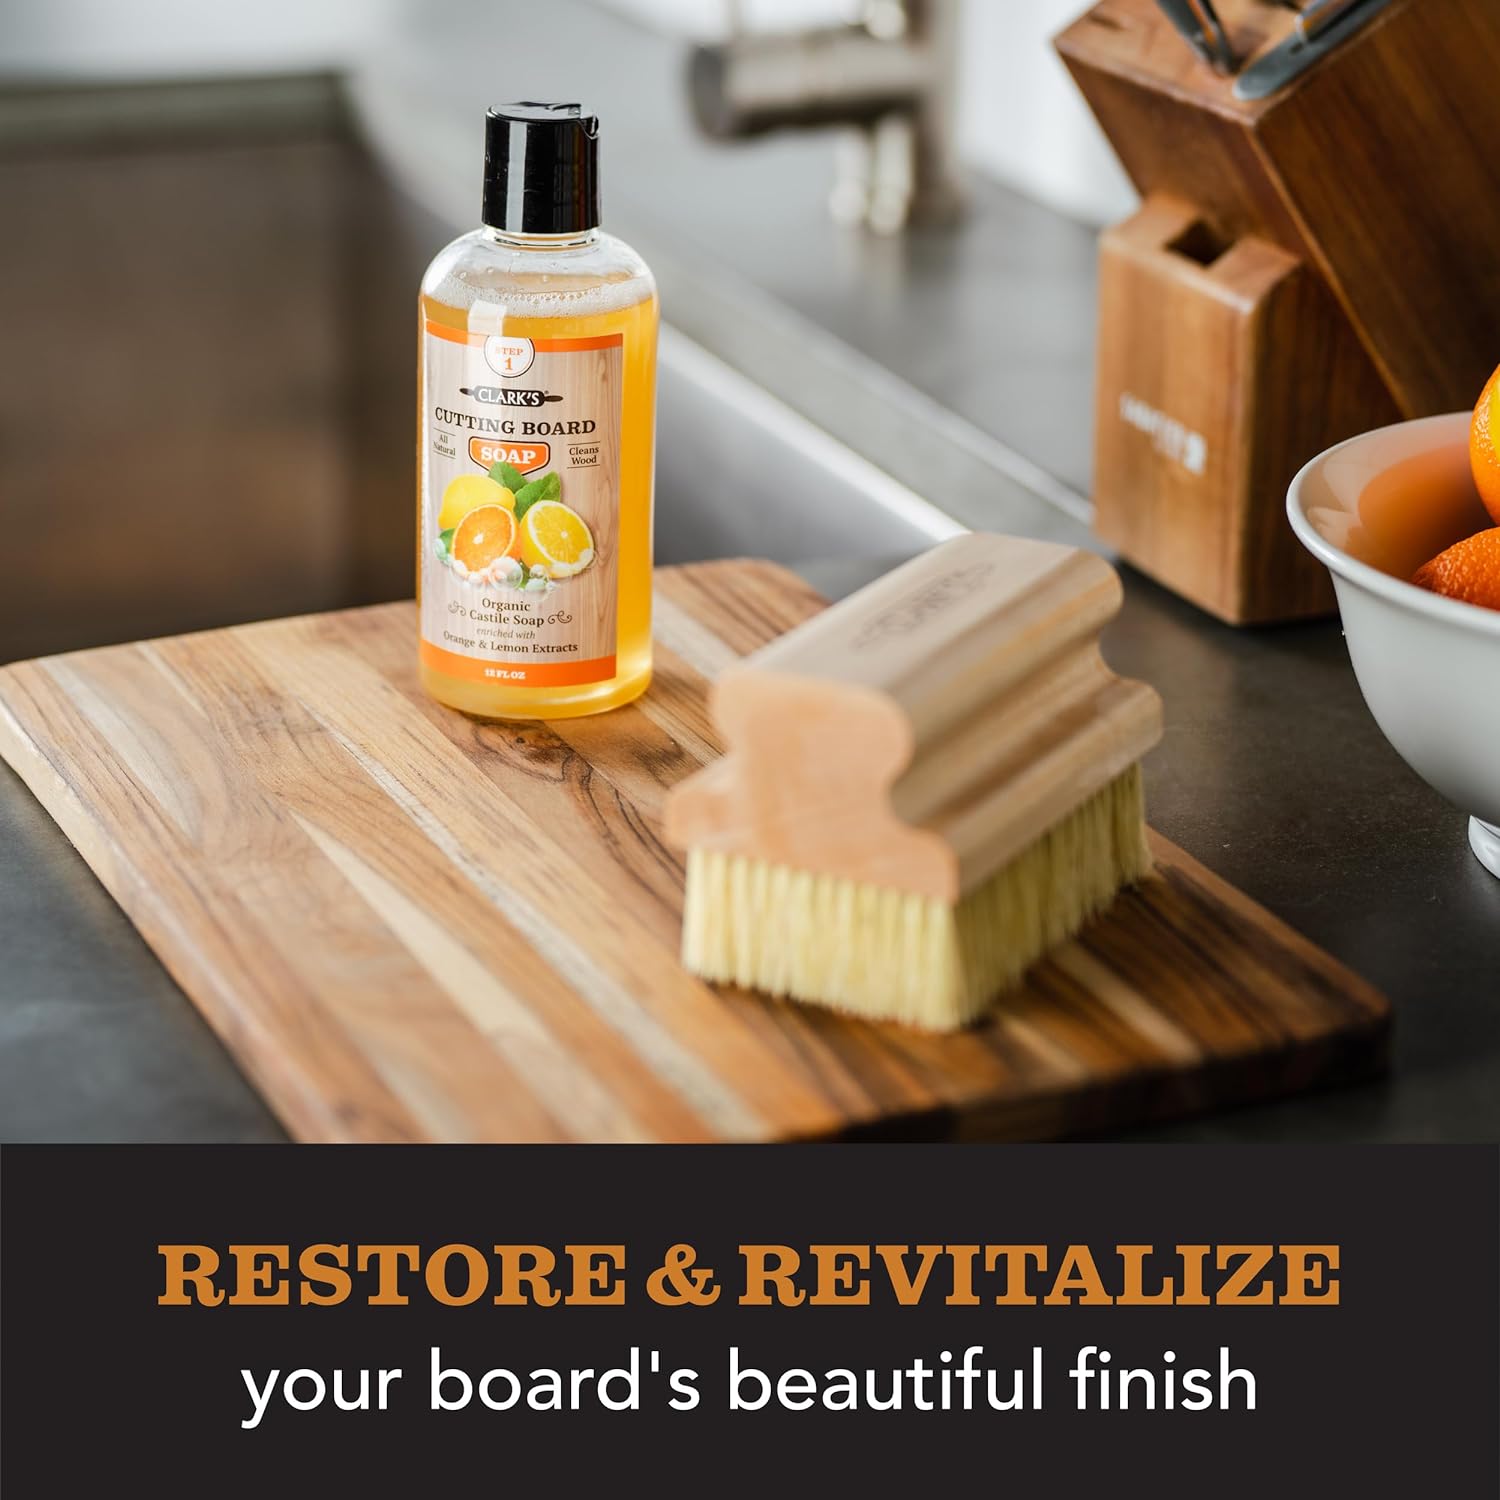 CLARK'S Cutting Board Organic Soap - Cleaner for Butcher Block, Countertop and Utensils - Enriched with Natural Orange & Lemon Extracts - Cleans and Restores Wood - Use Before Food Safe Mineral Oil : Everything Else